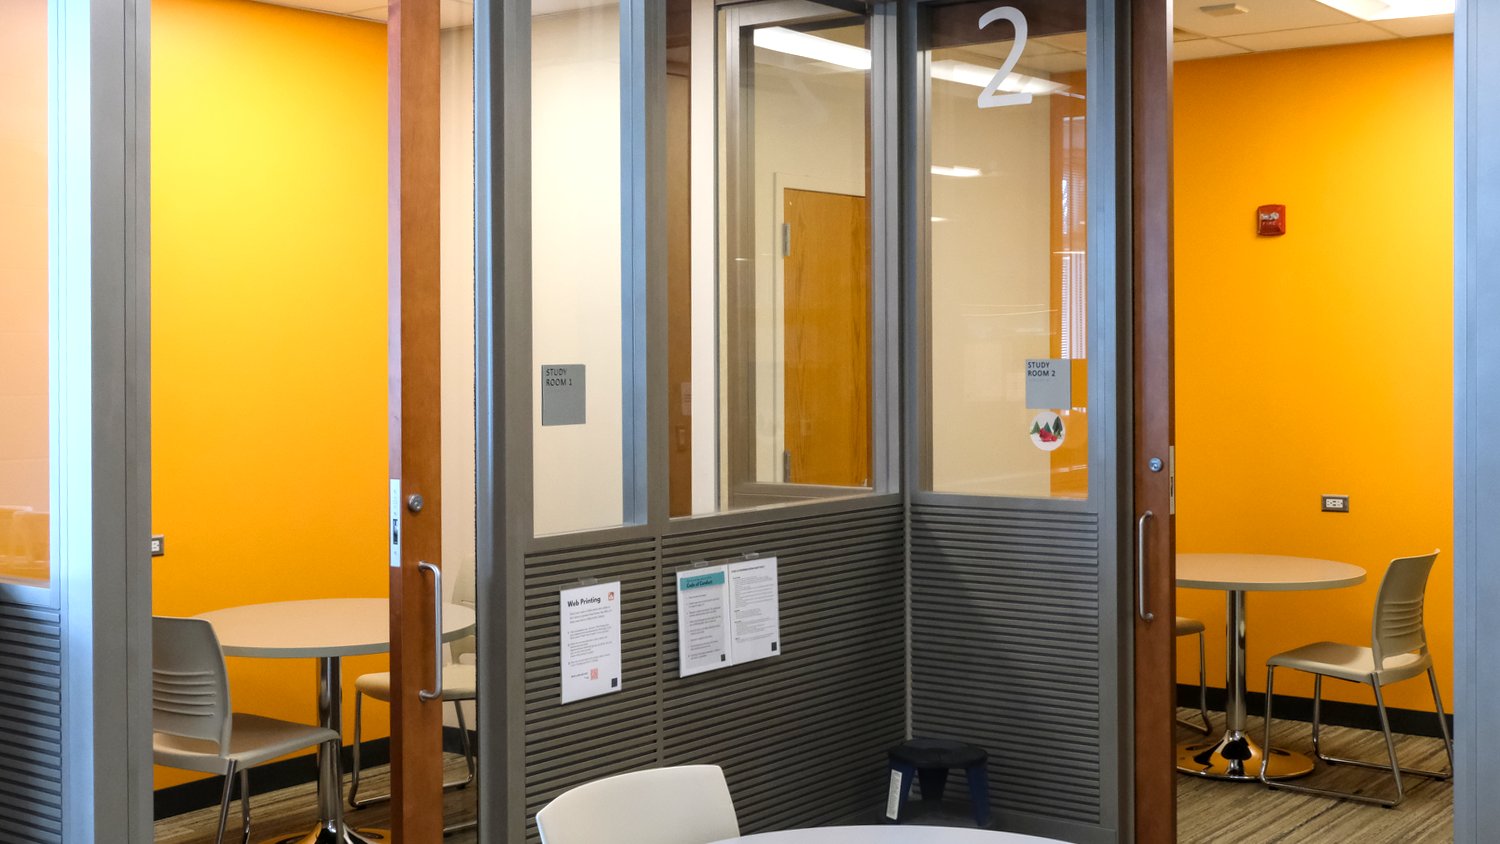 Study rooms at the library.